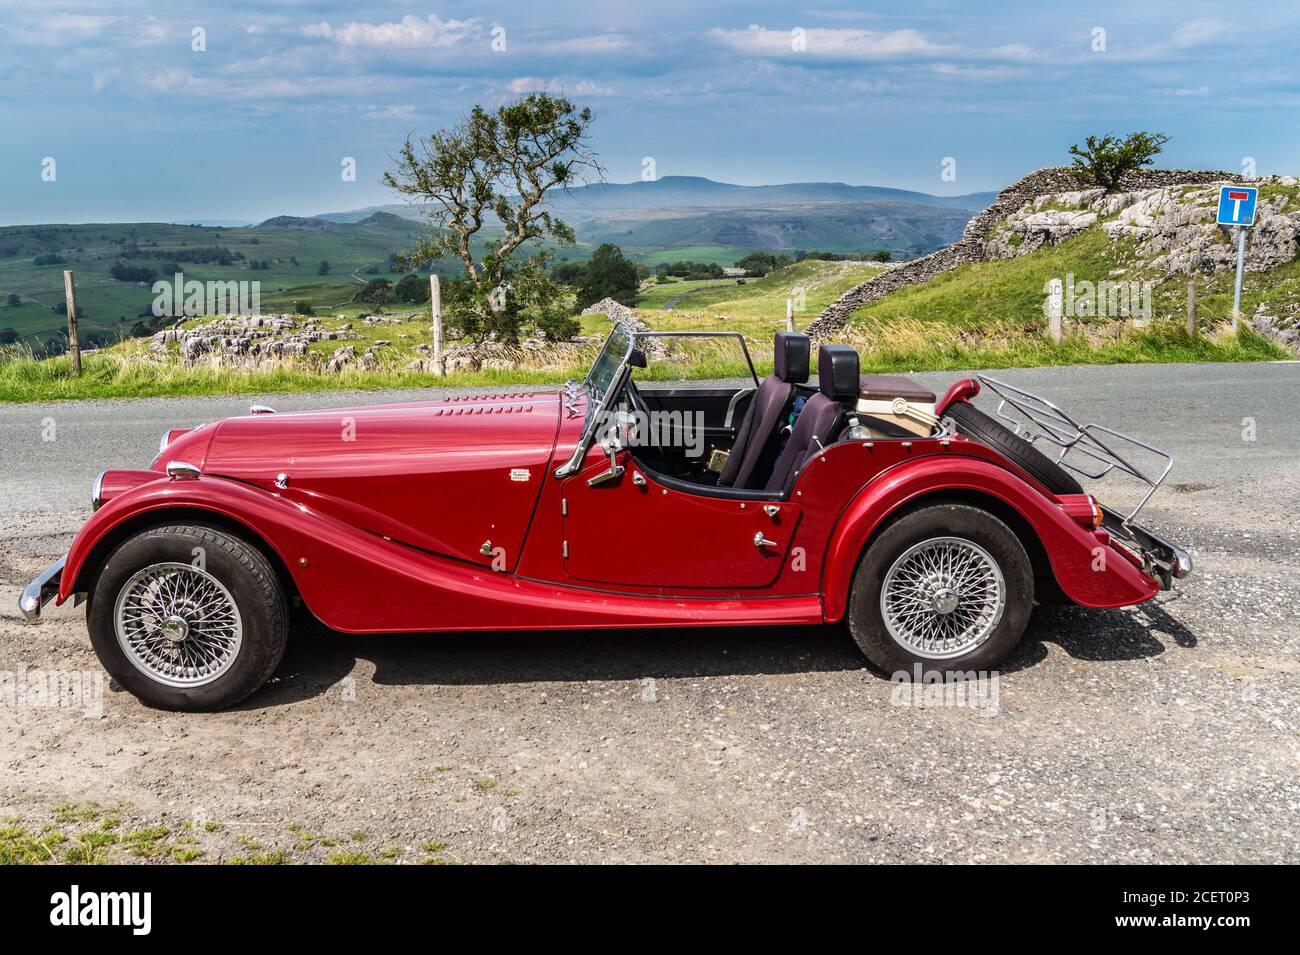 2003 model Morgan 4/4 drop-head coupé sports car, Winskill Stones, Stainforth, North Yorkshire, England Stock Photo